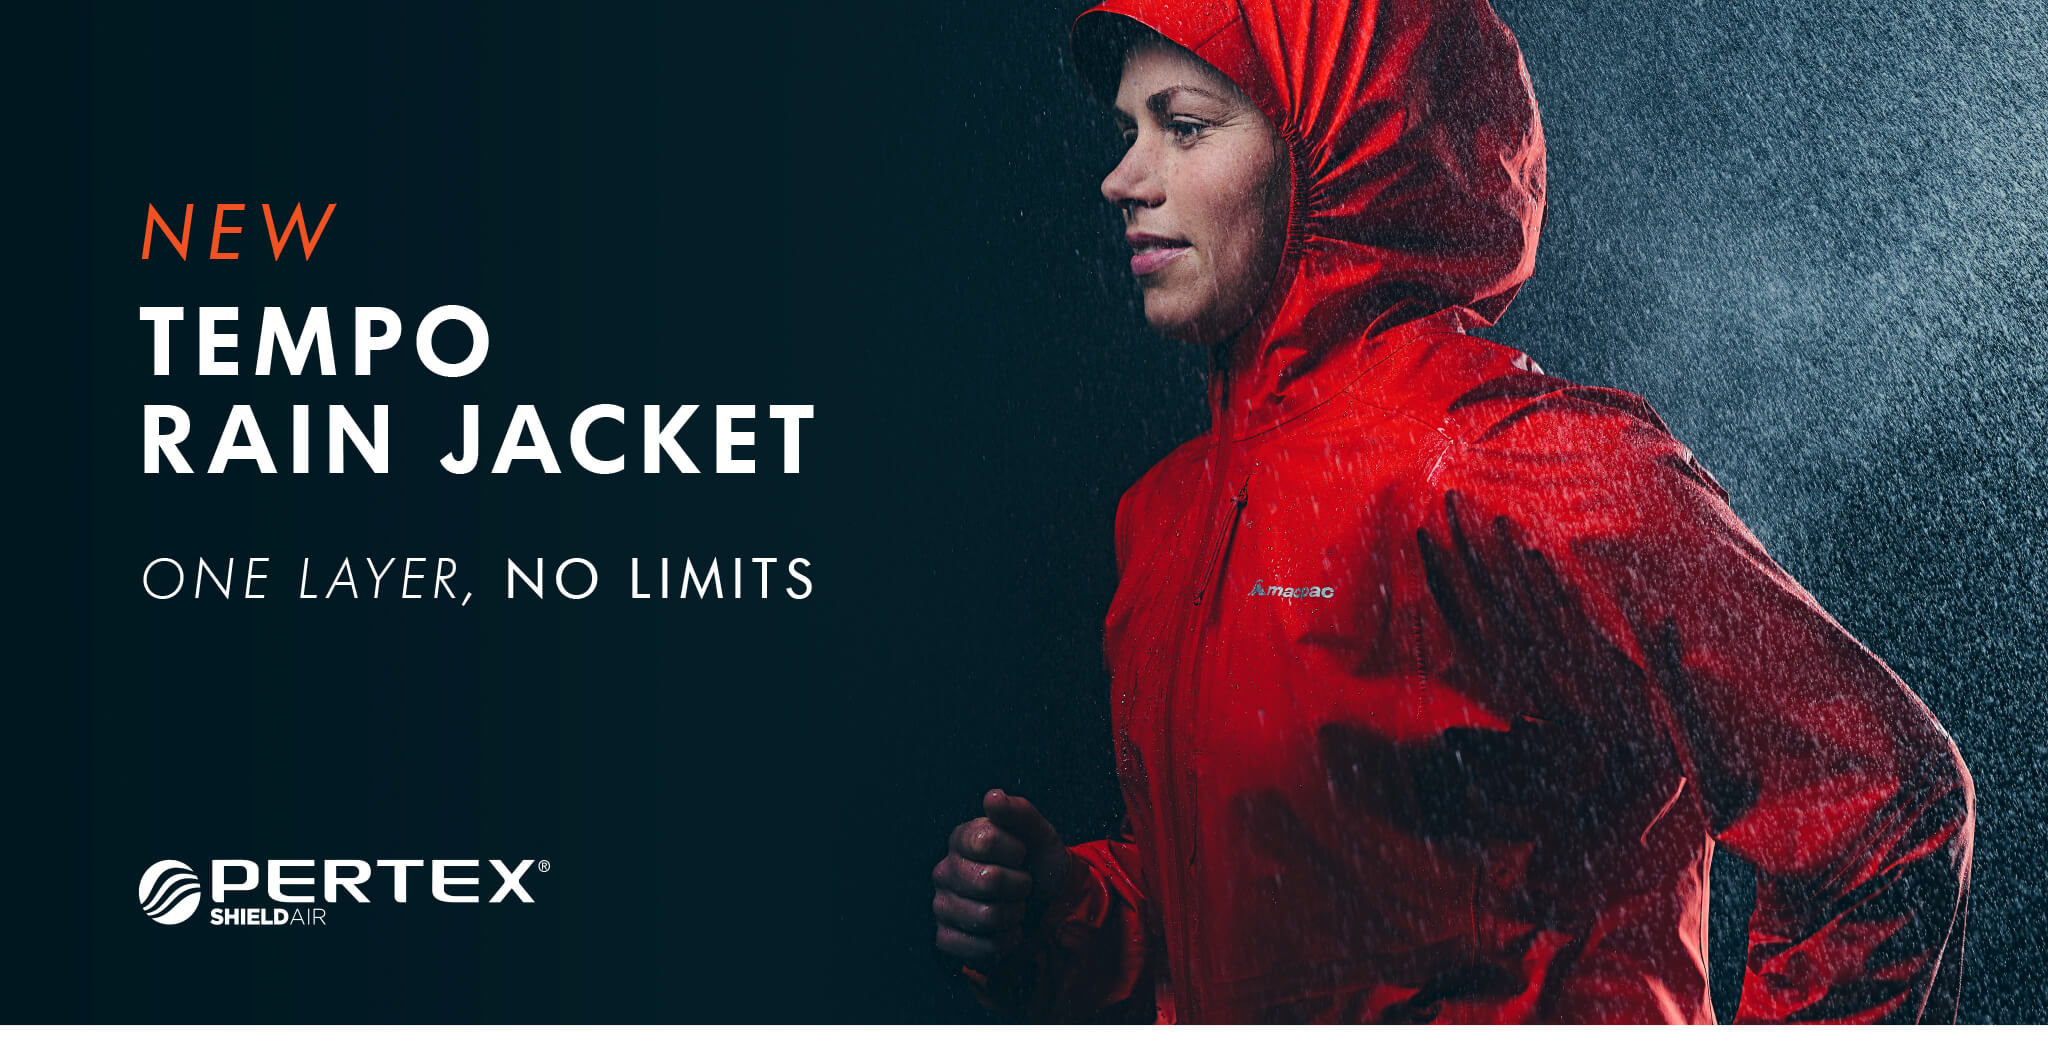 The New Tempo Jacket | One layer, no limits - Pertex Shield Air